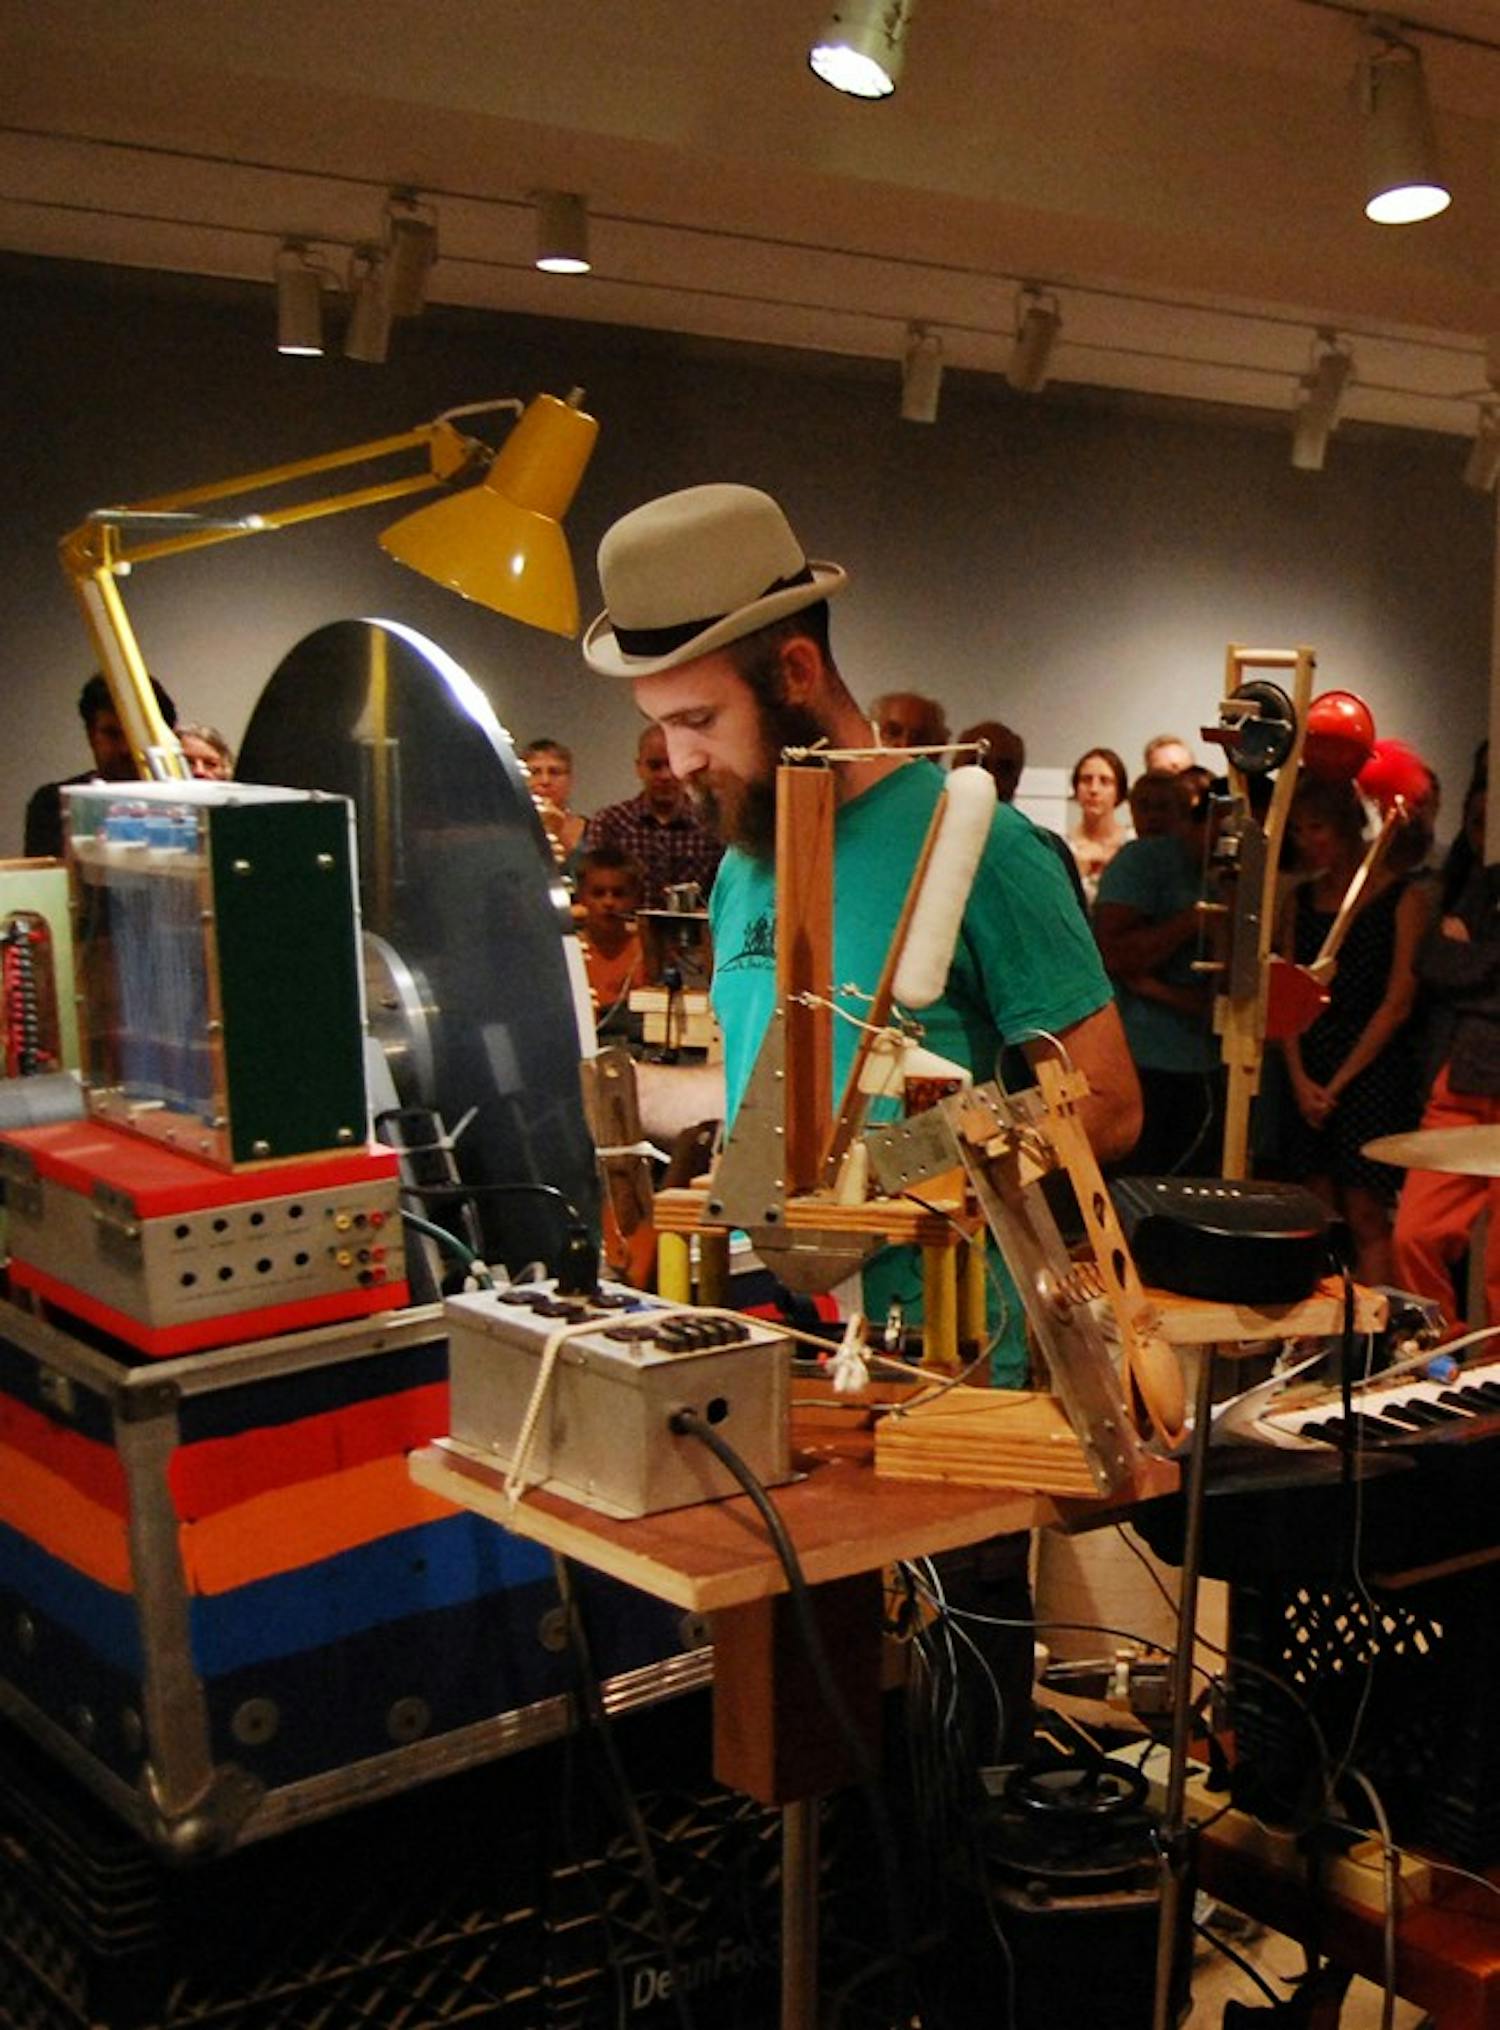 Mark Dixon of the alternative home-made music project INVISIBLE performs for a crowd at Ackland Art Museum on Thursday night.